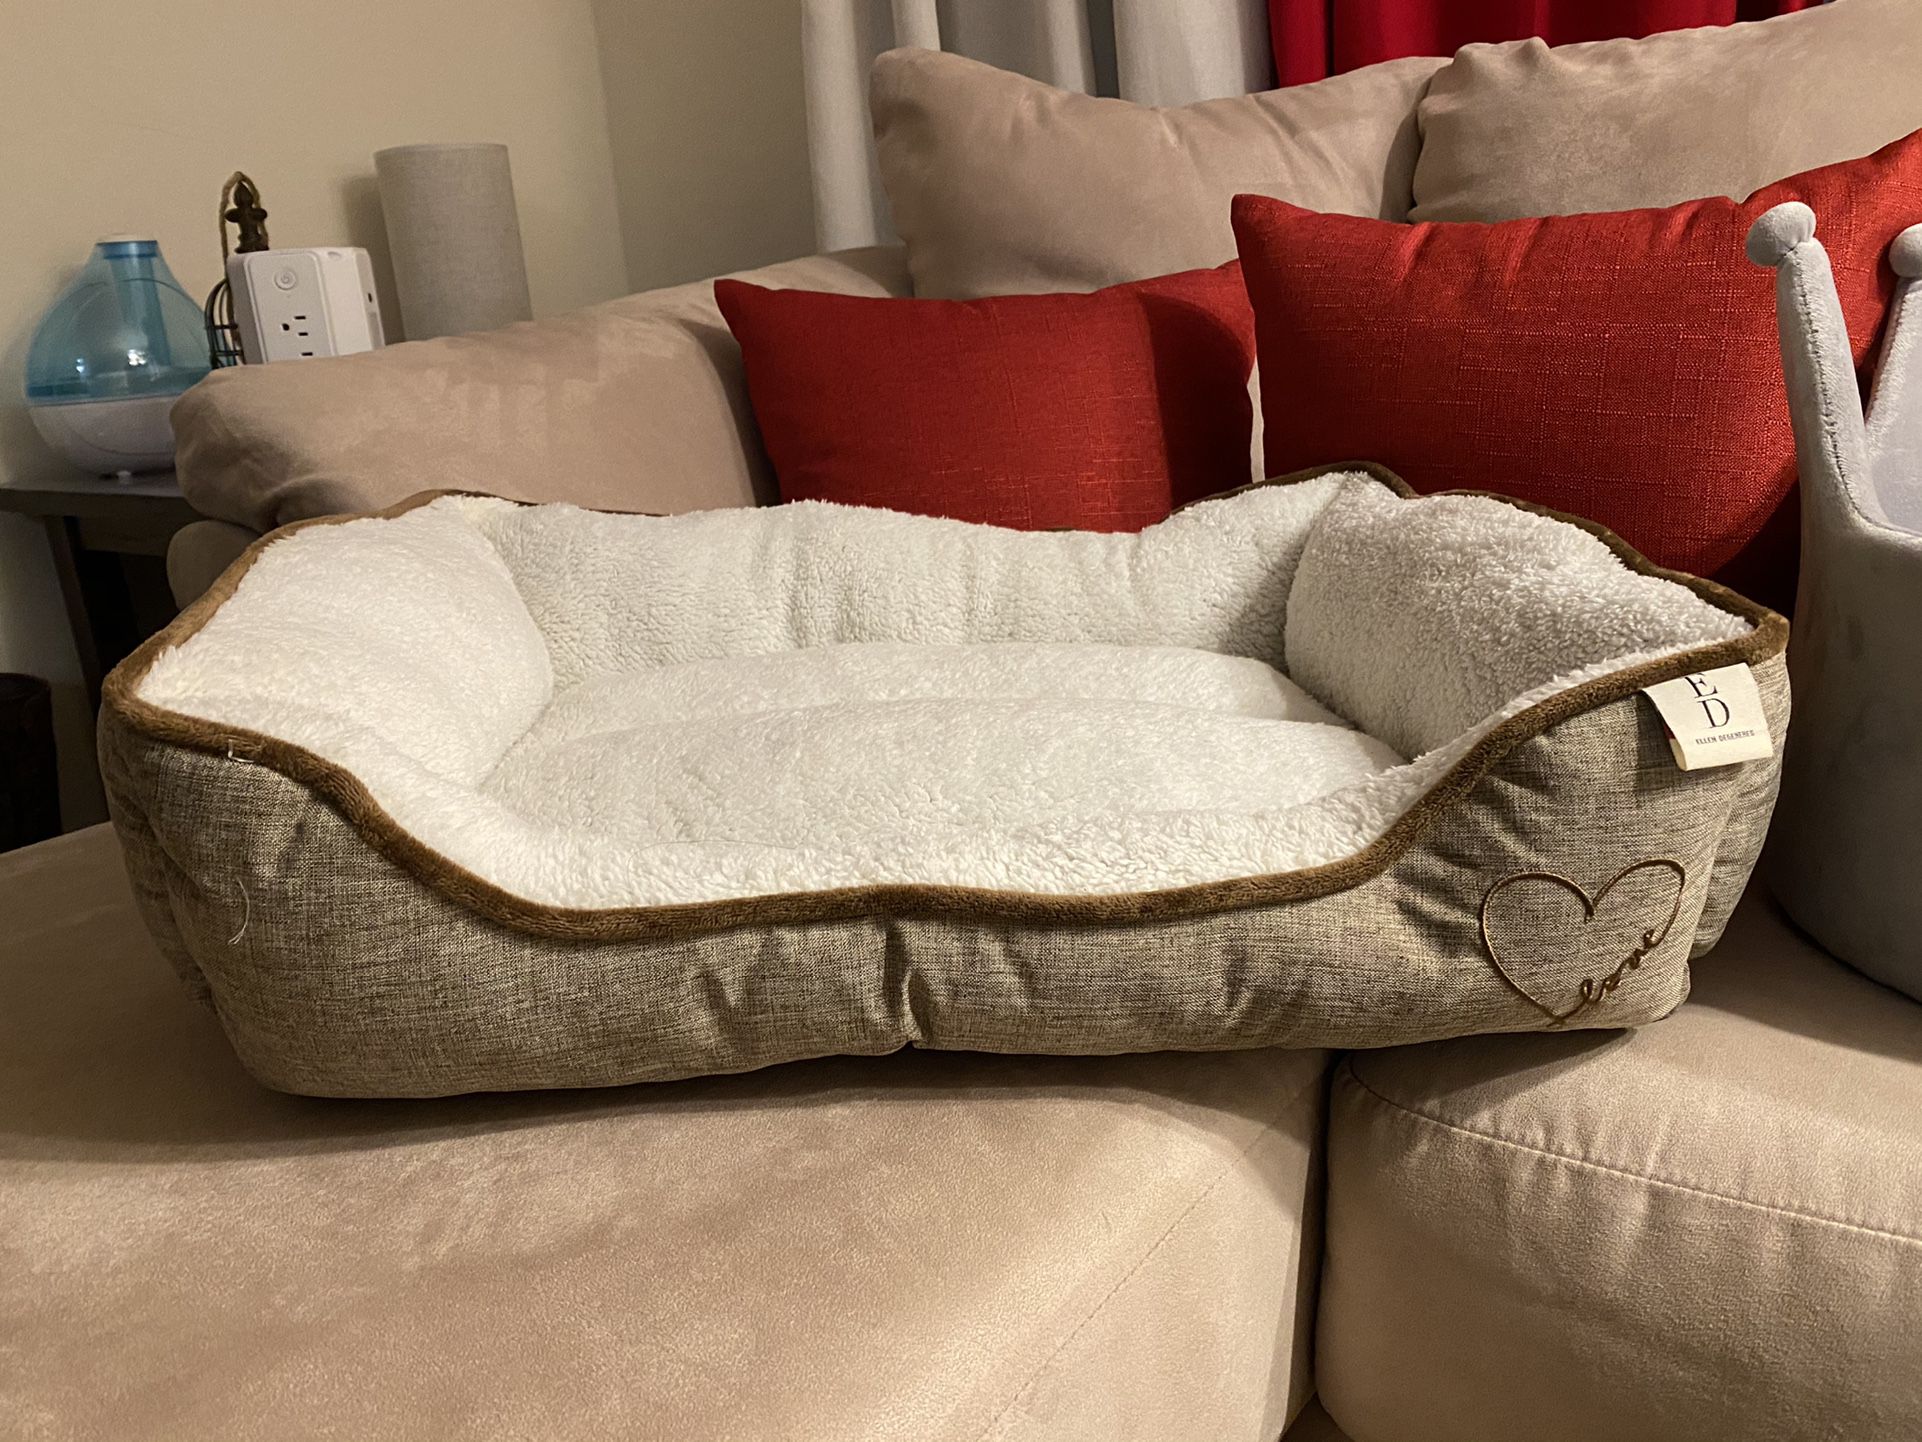 NEW Dog Bed For Small Dog Puppy Puppies